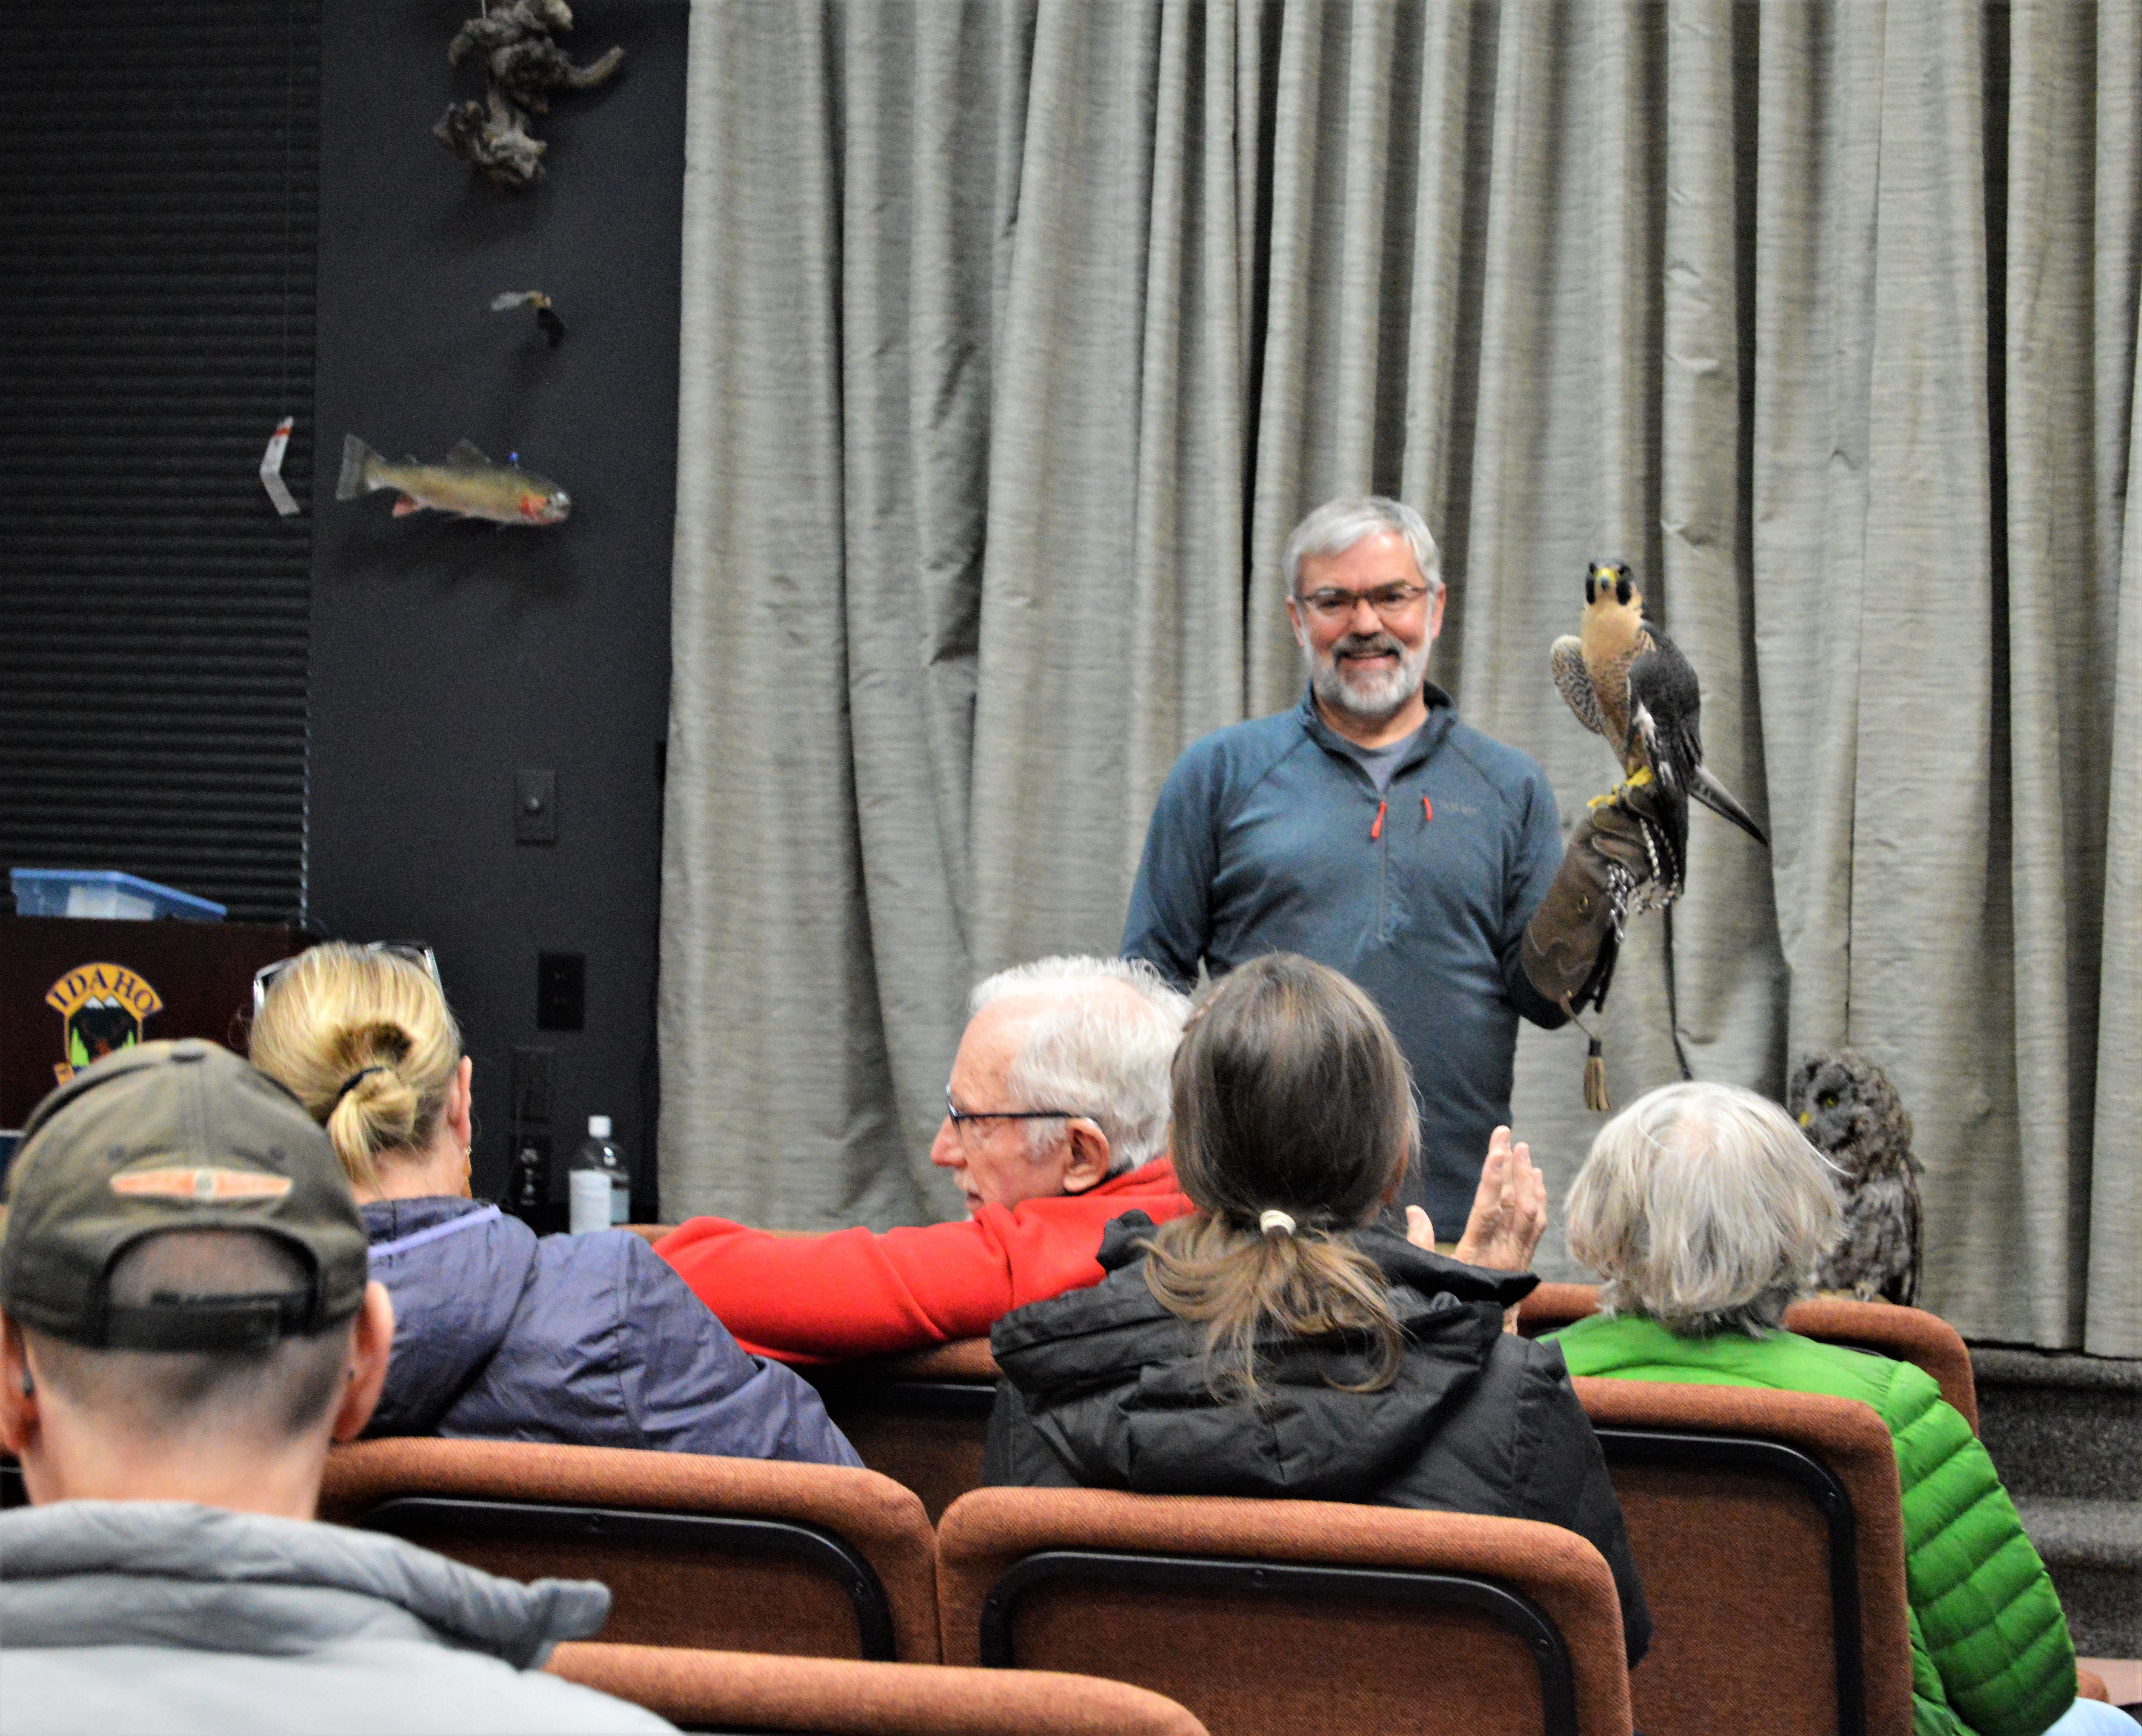 man holding a peregrine falcon at MK Nature center bird seed sale